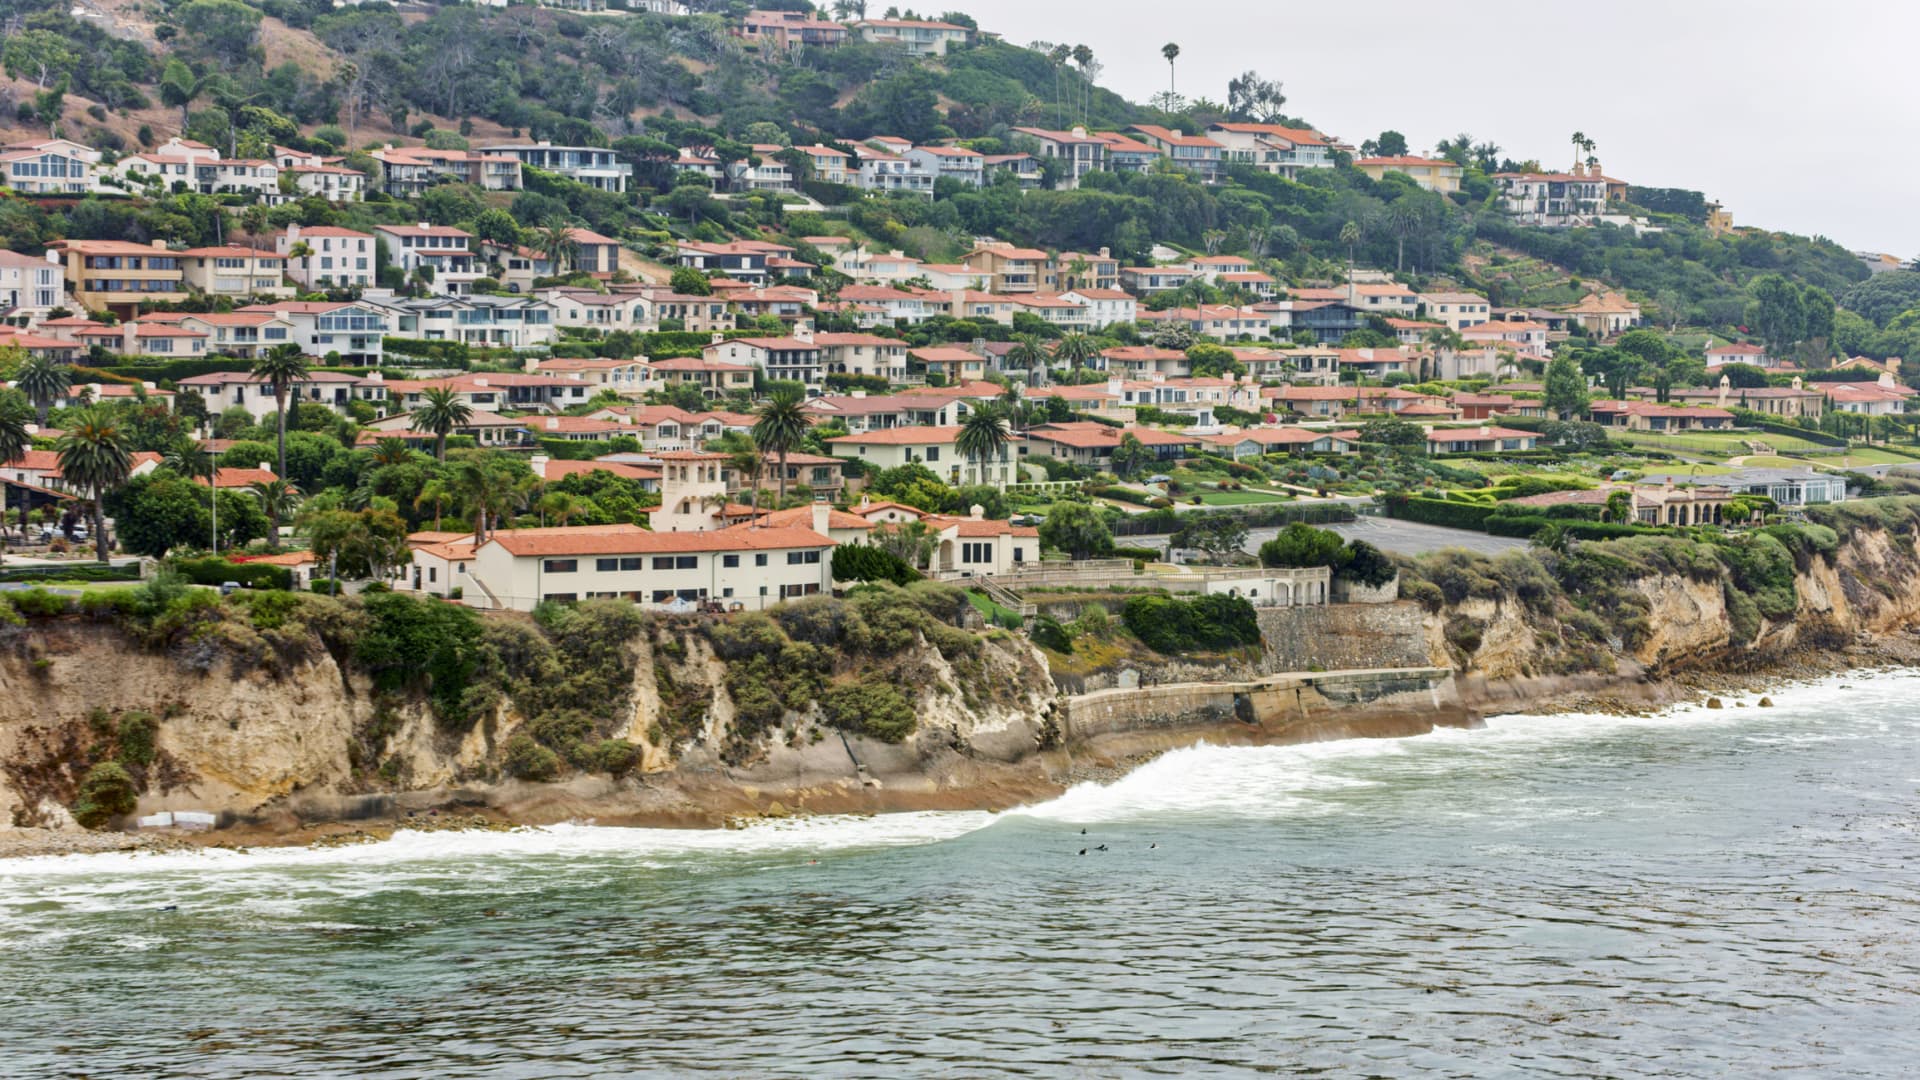 Rancho Palos Verdes, California ranked as the richest retirement town in the U.S., according to GOBankingRates.